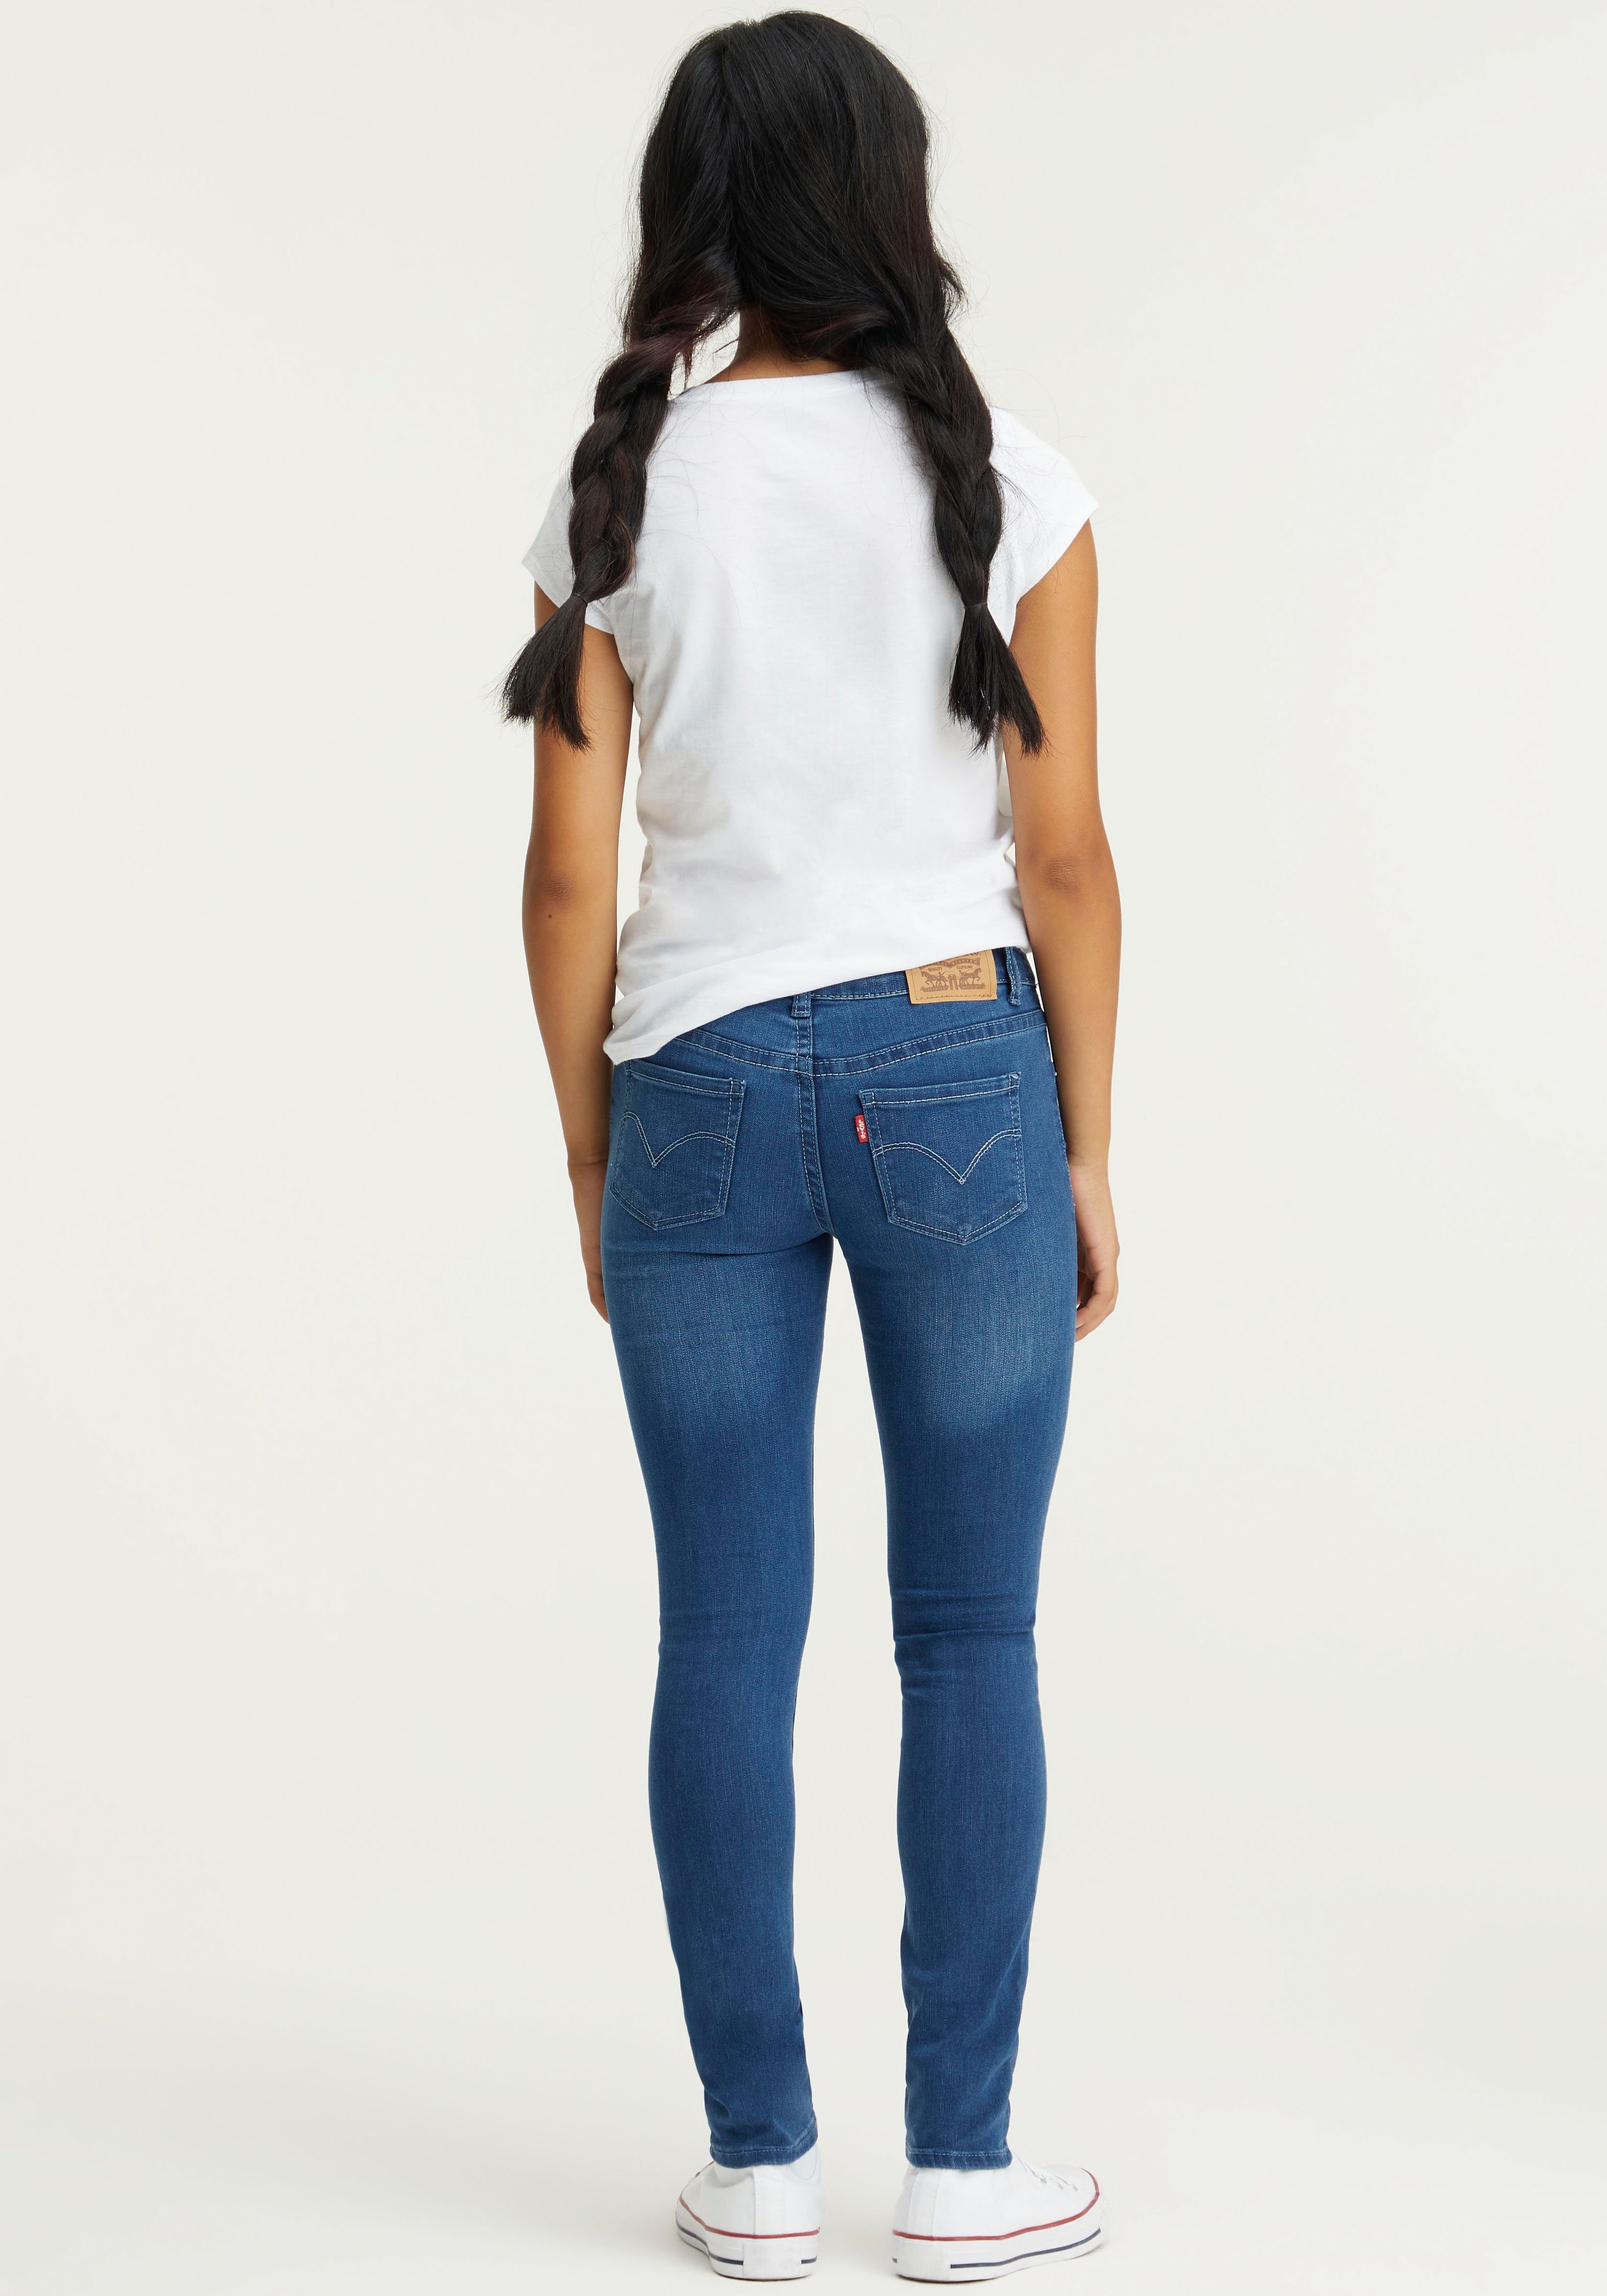 Kids SKINNY Stretch-Jeans FIT GIRLS Levi's® 711™ JEANS for